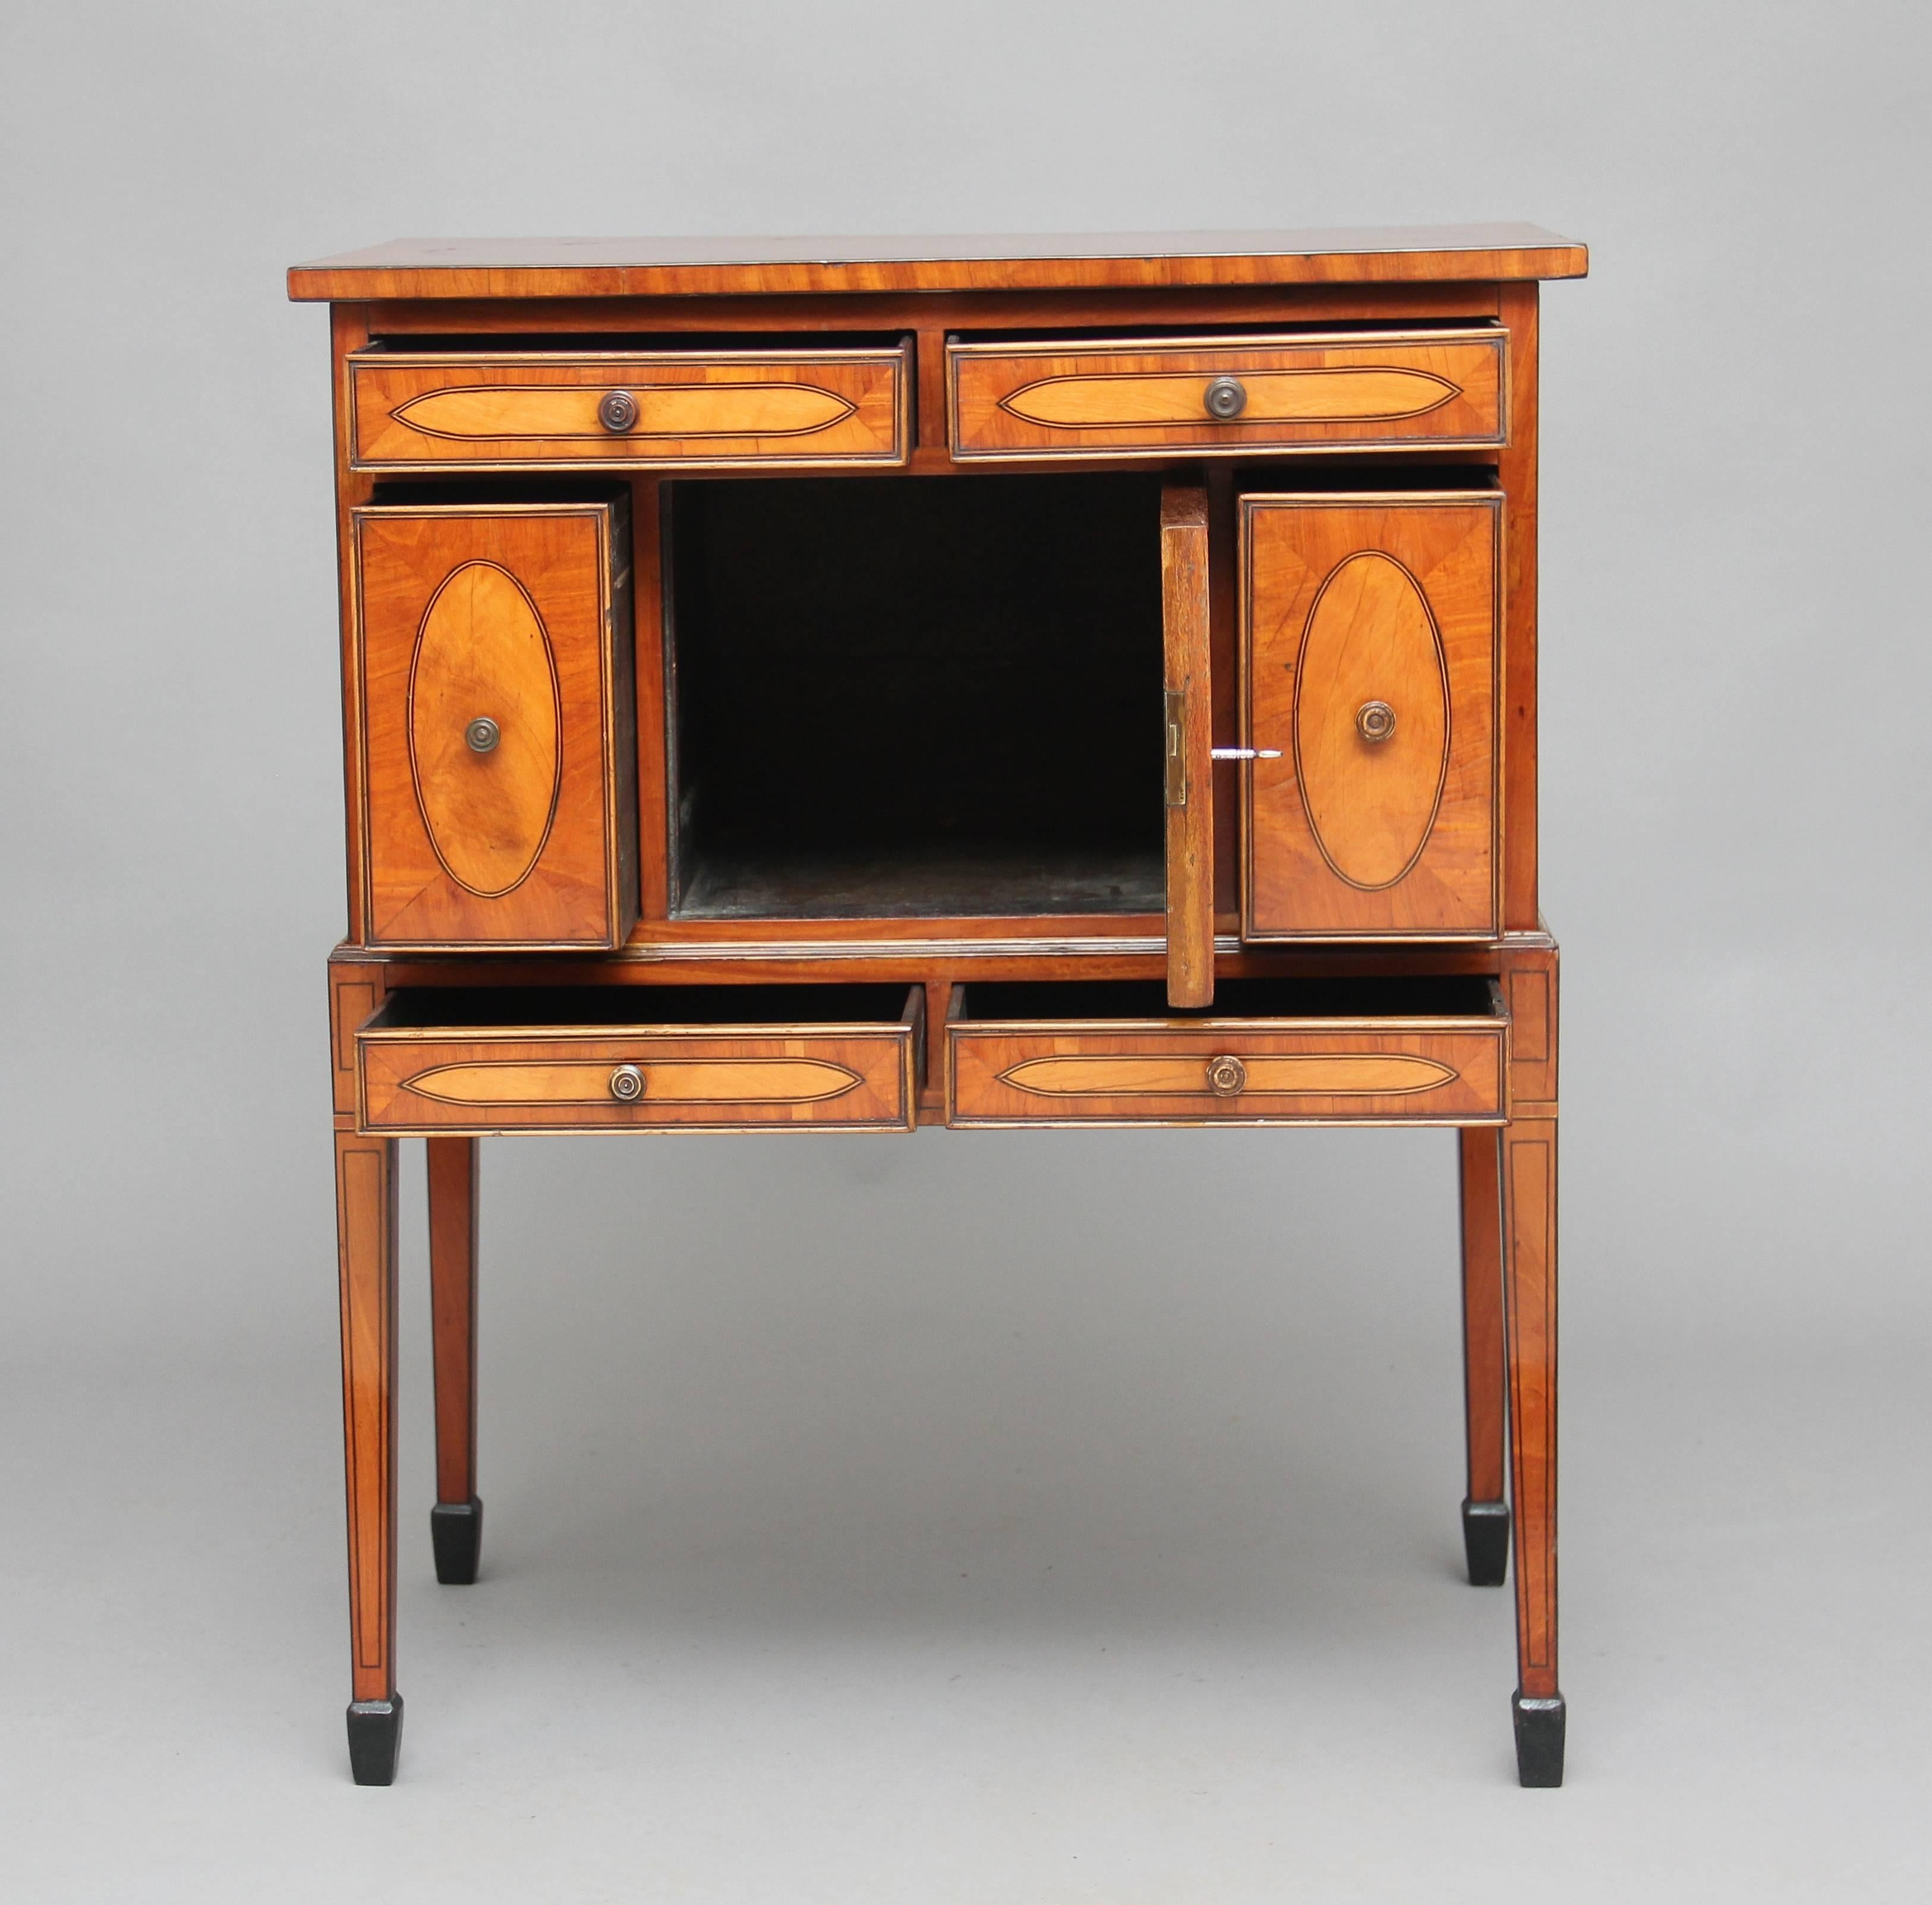 A lovely quality early 19th century satinwood cabinet inlaid all over, with oval satinwood panels with ebony and boxwood stringing, the top section with two long drawers above a central cupboard flanked by two deep drawers, standing on a tapered leg